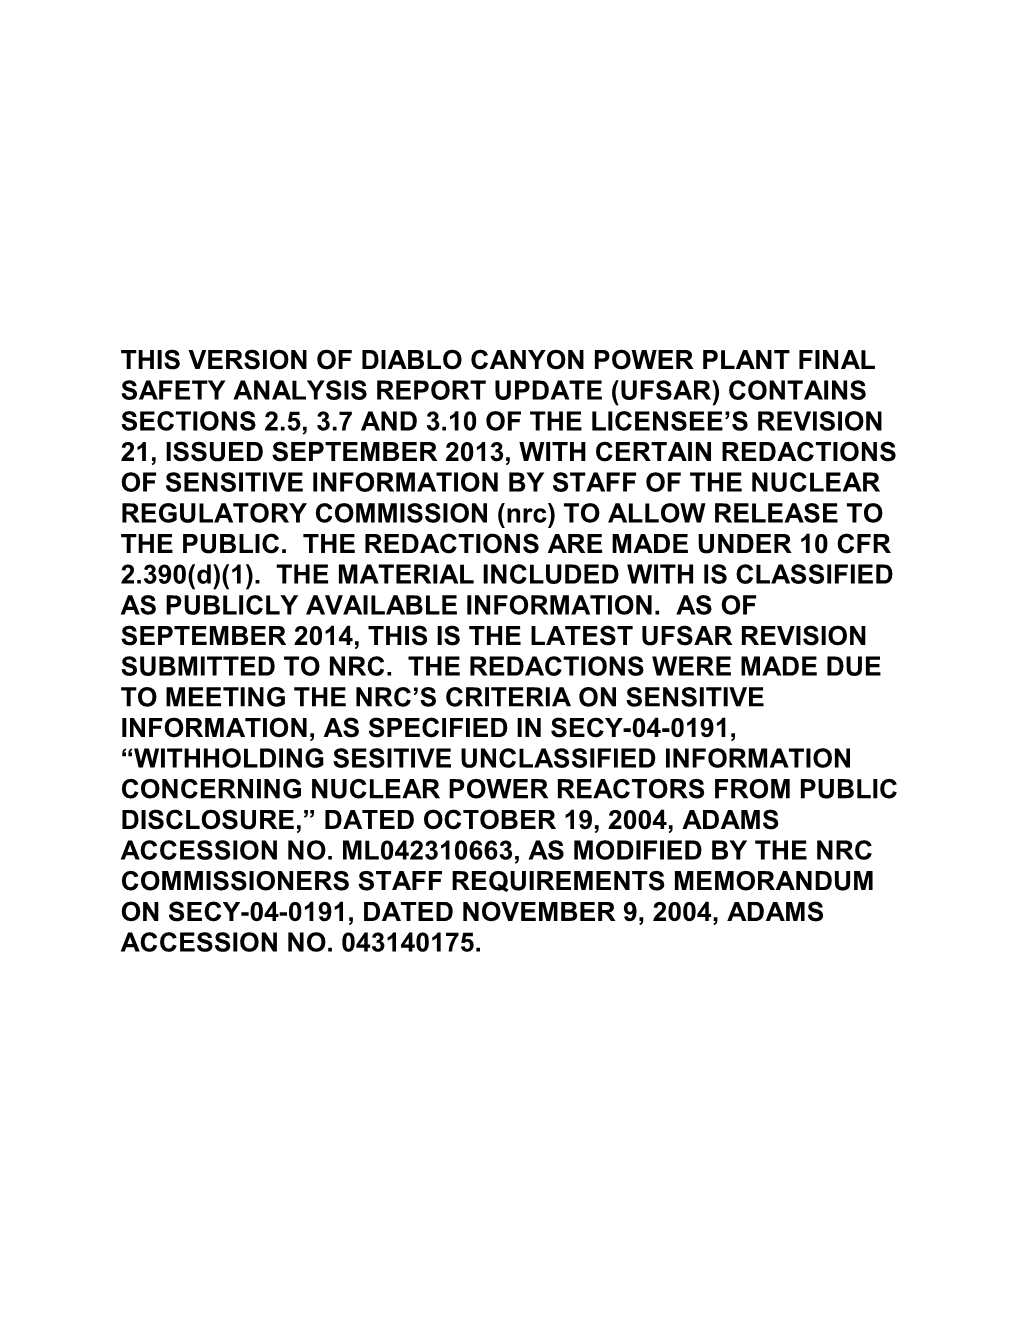 Diablo Canyon Power Plant Units 1 and 2 Final Safety Analysis Report Update